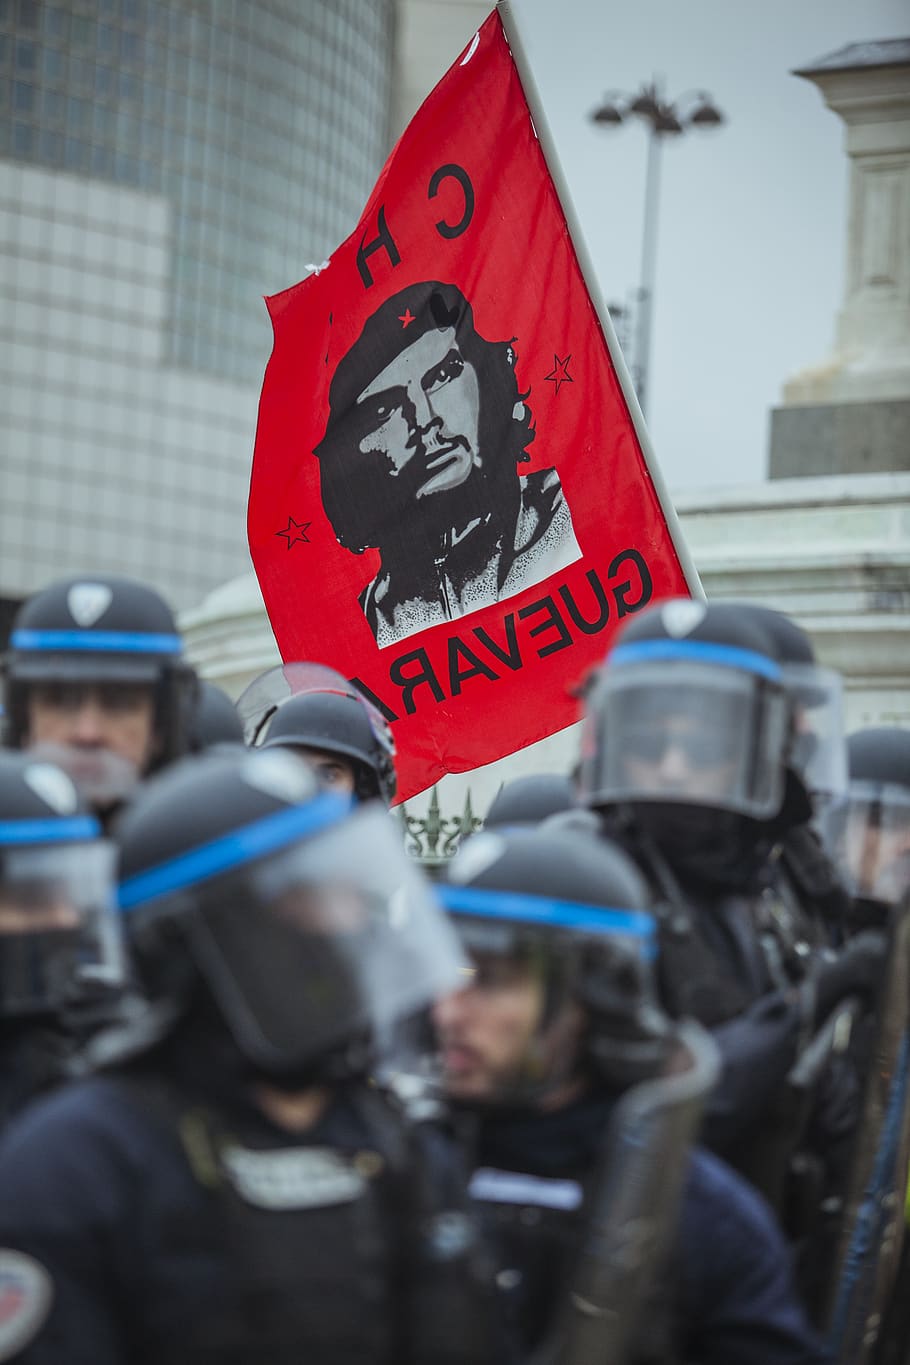 red Che Guevara flag near group of police during daytime, communication